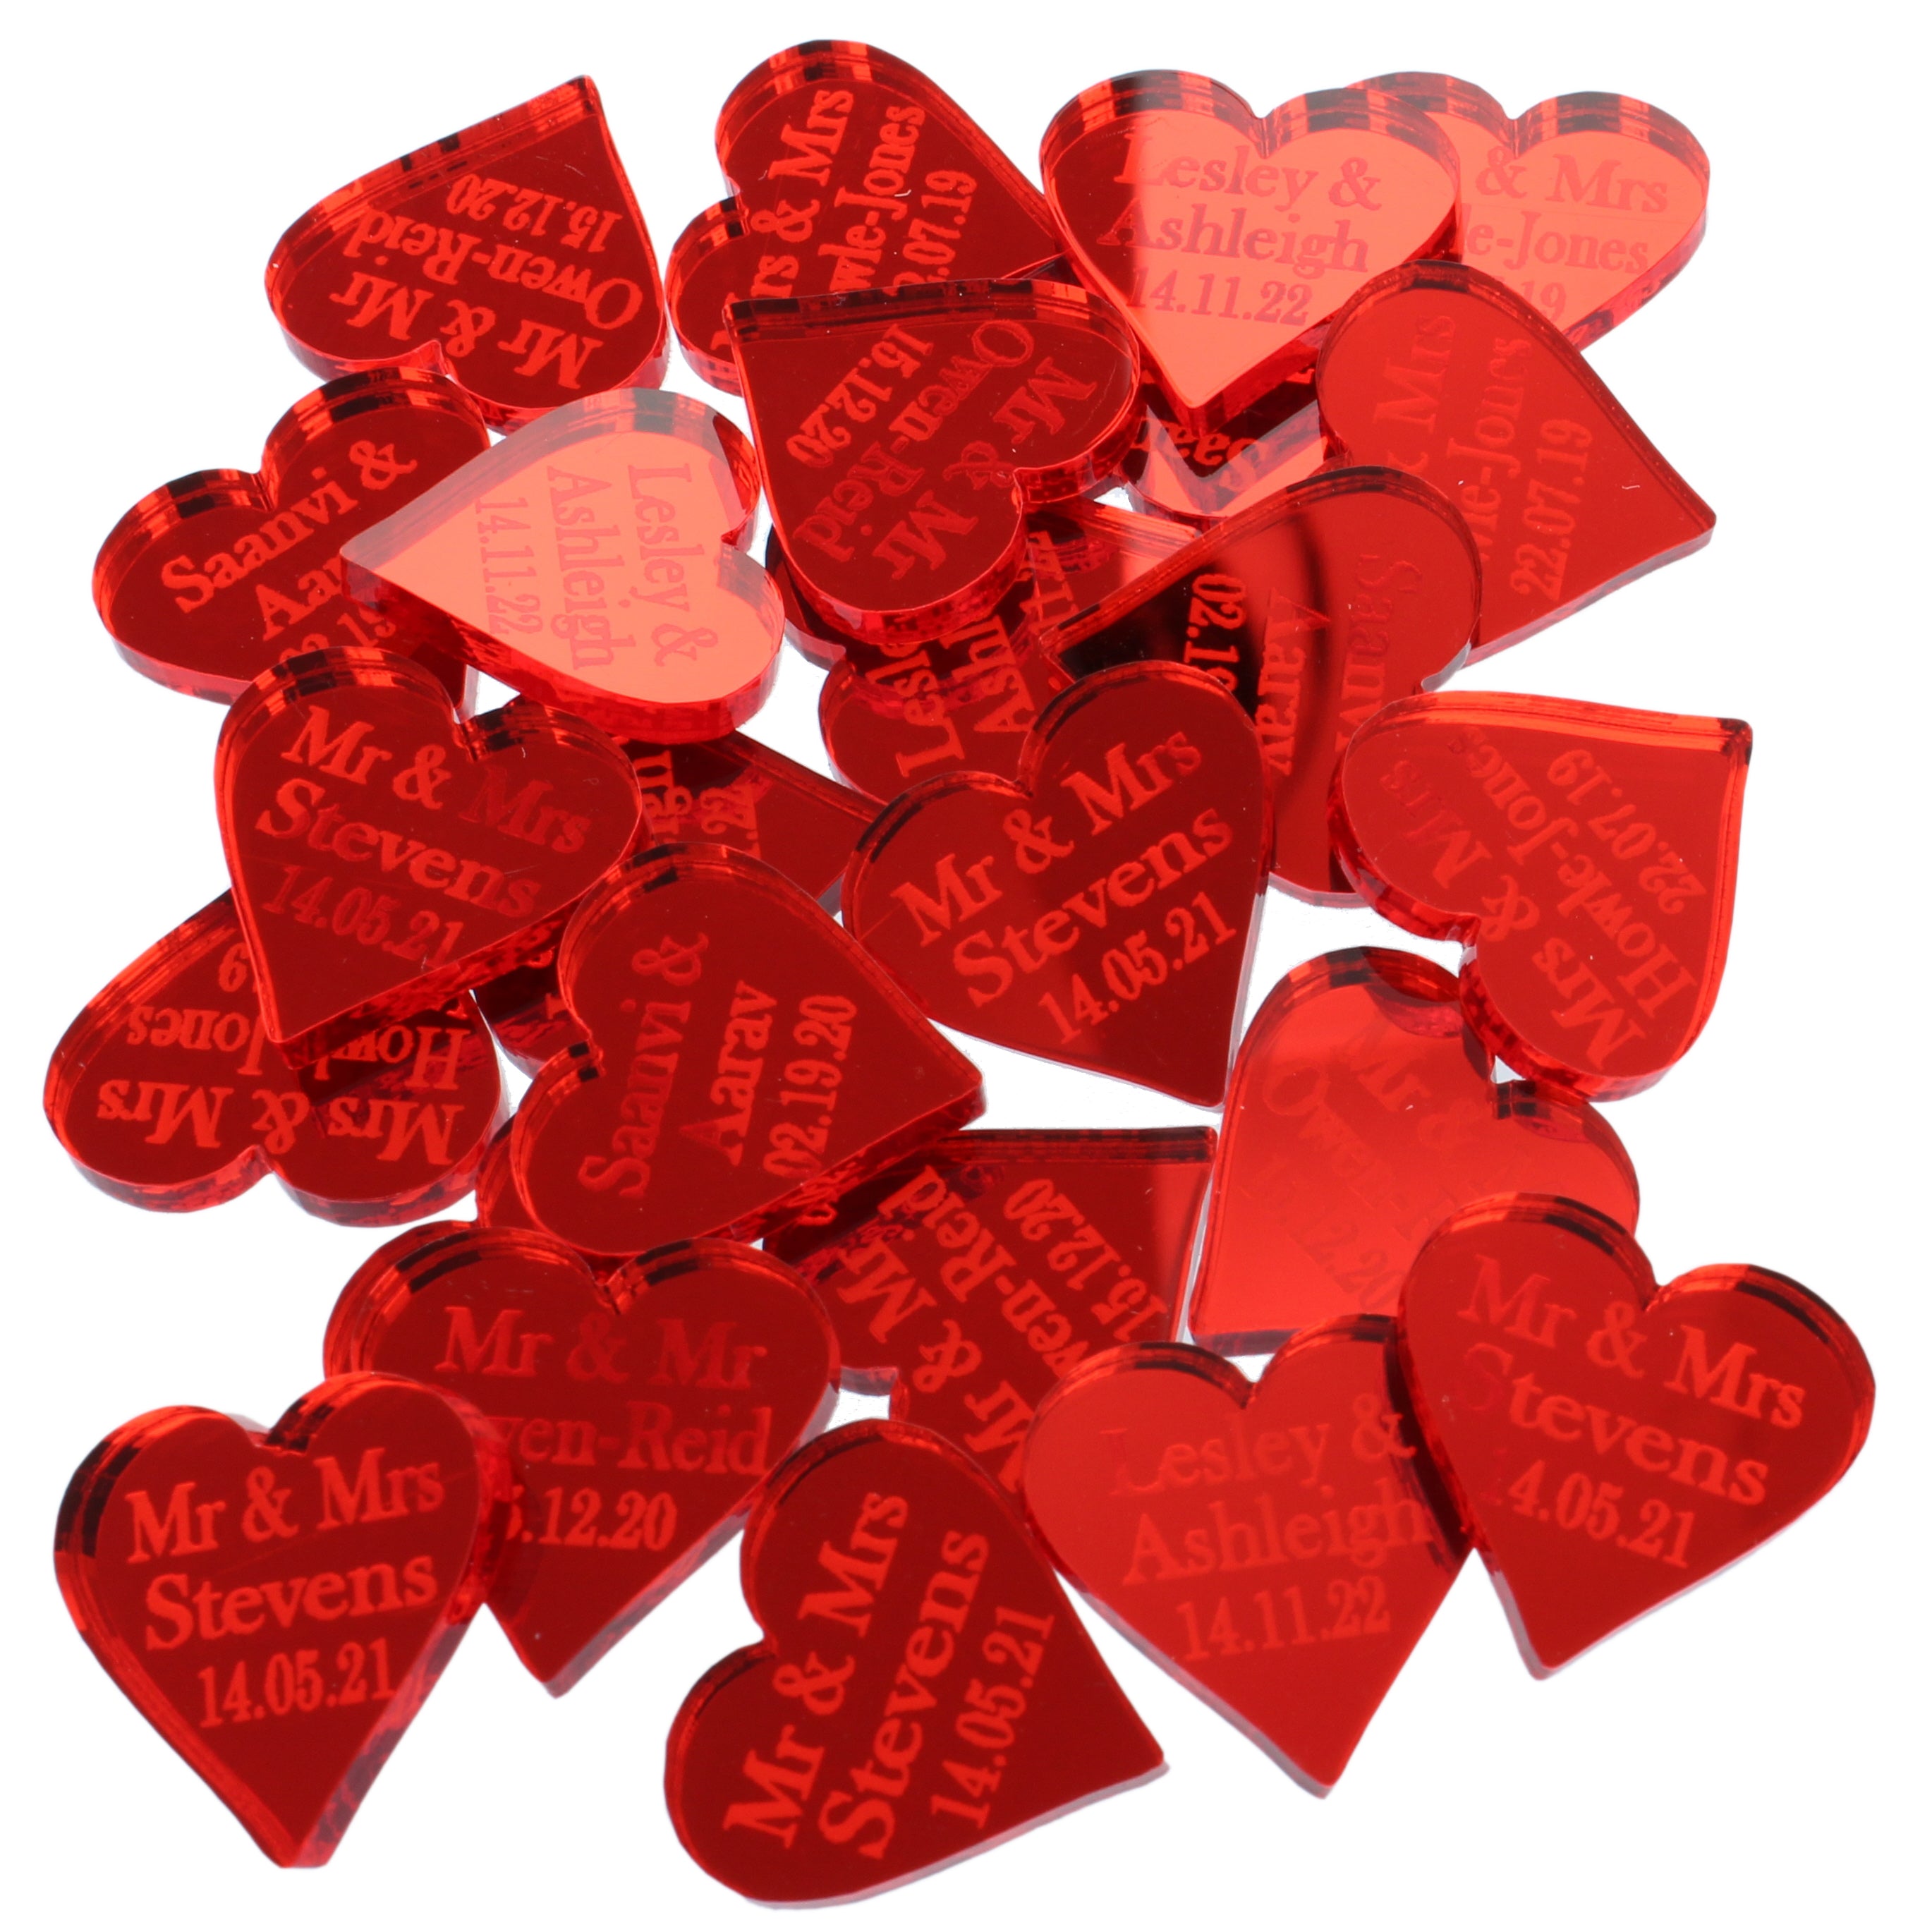 Personalised Wedding Favours - Red Mirror Acrylic Love Hearts